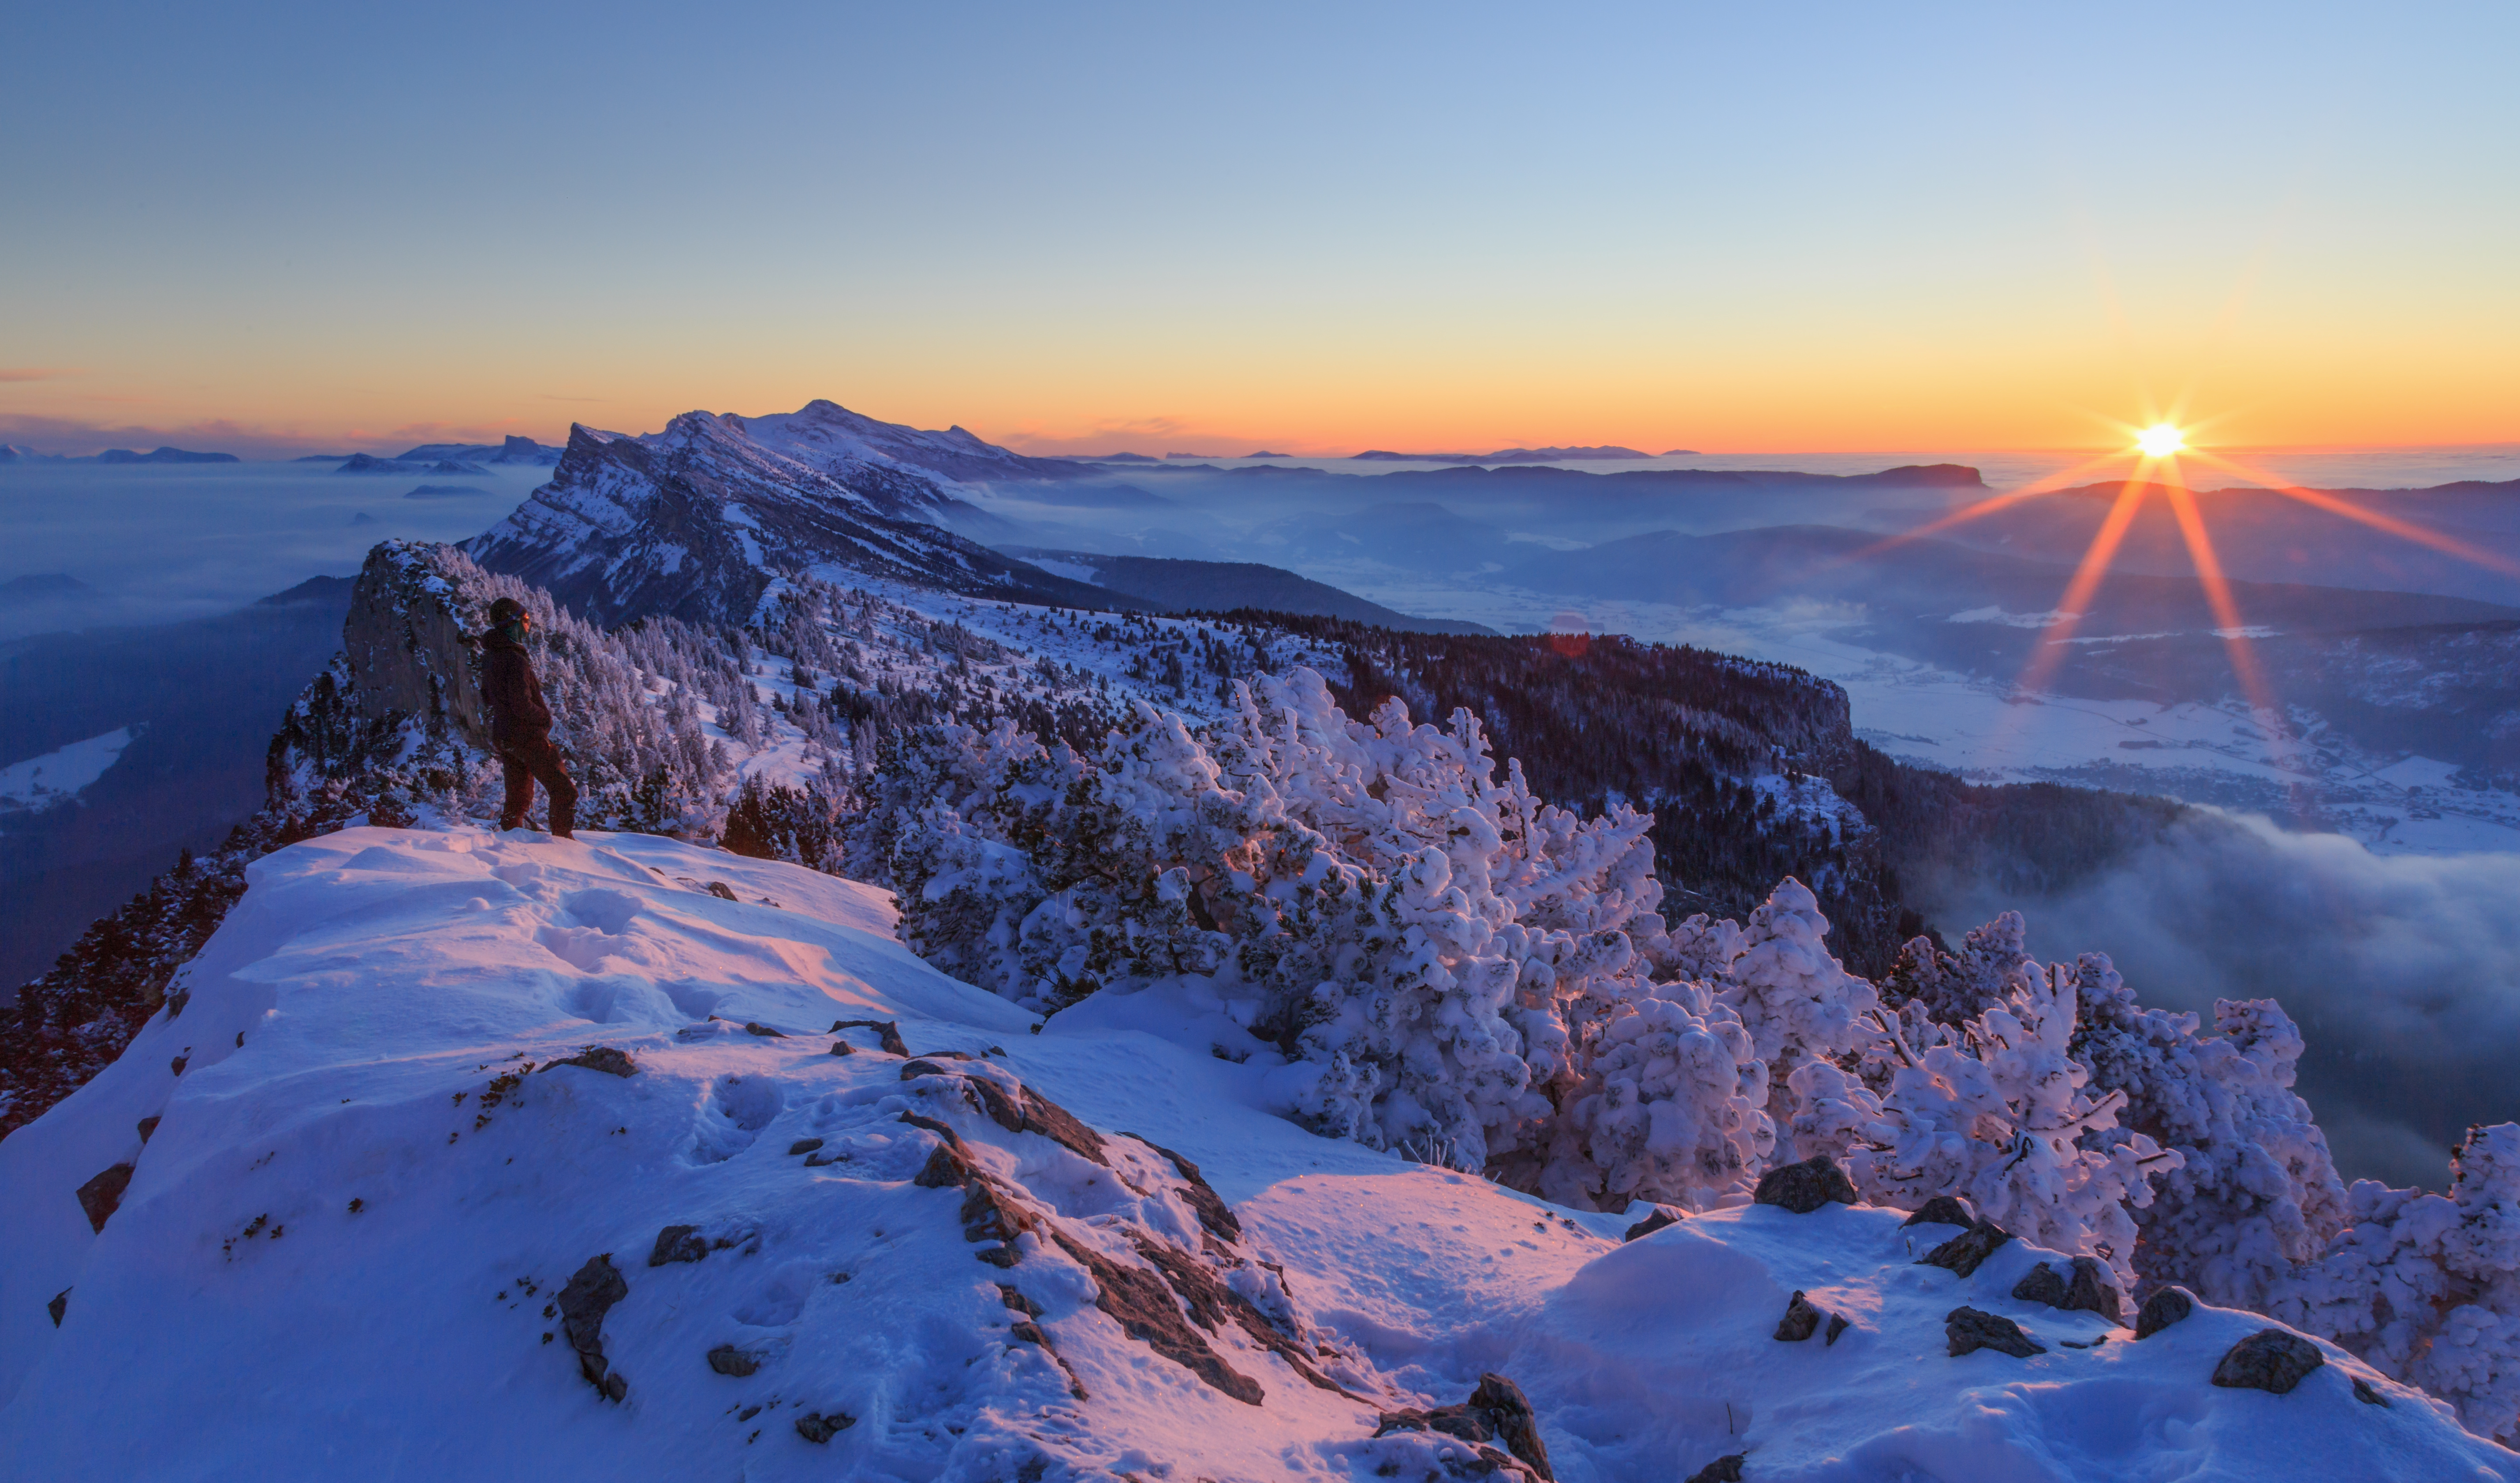 Hiker looking over a snow covered mountain range, Vercors, France, during a winter sunset.